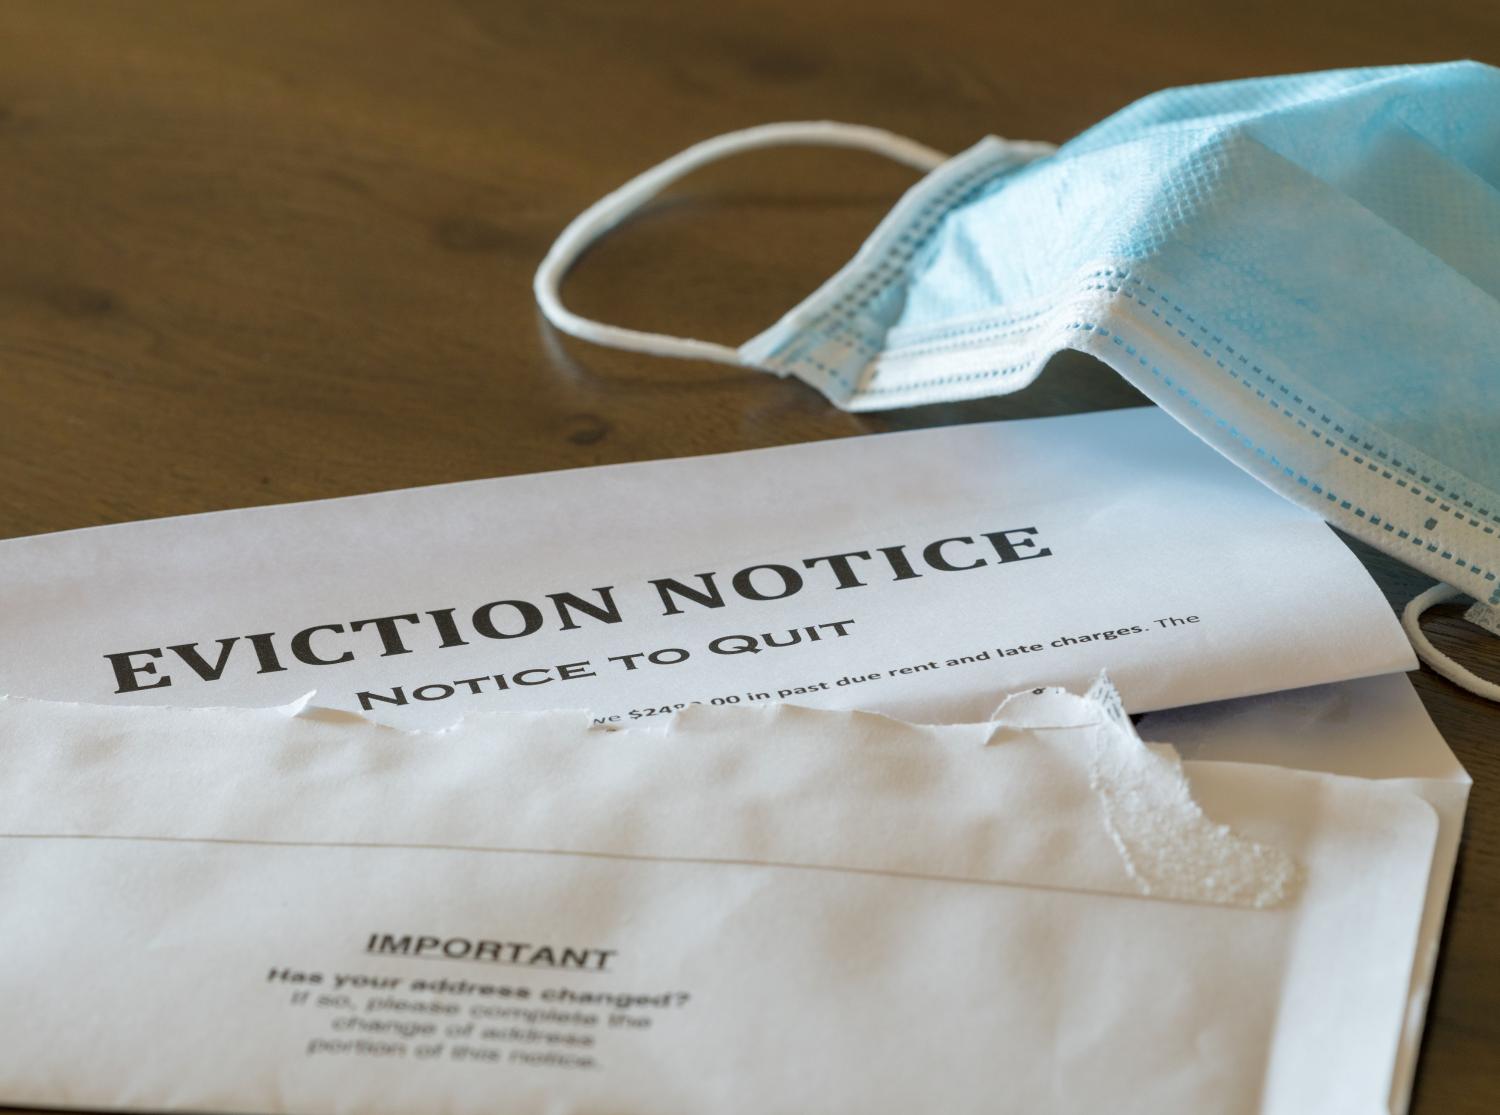 Eviction notice and surgical mask